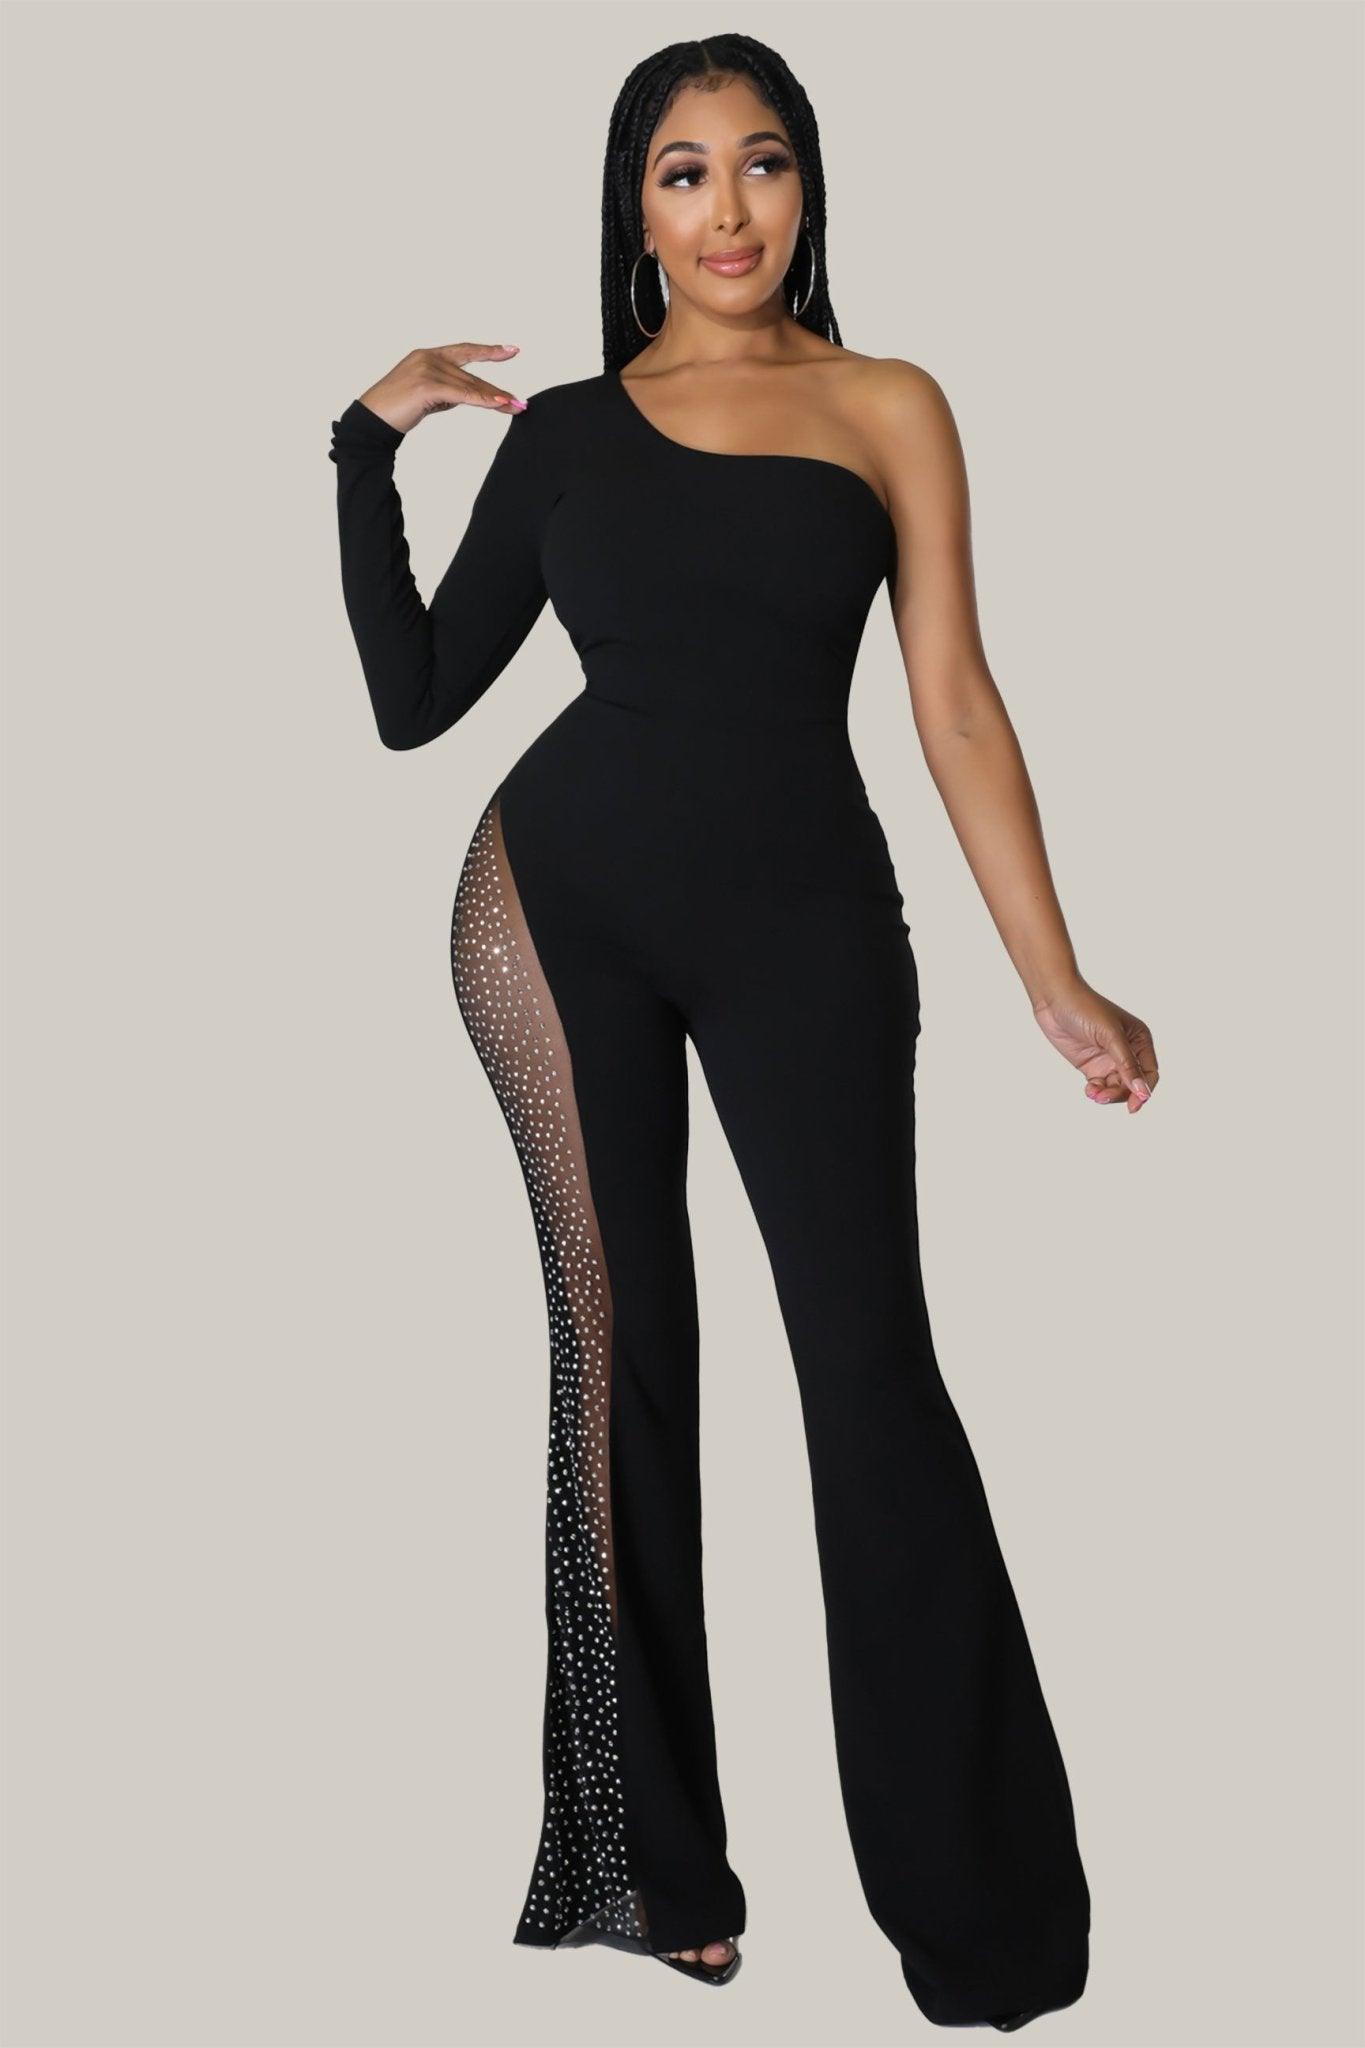 Goddess Babe One Shoulder Jumpsuit - MY SEXY STYLES